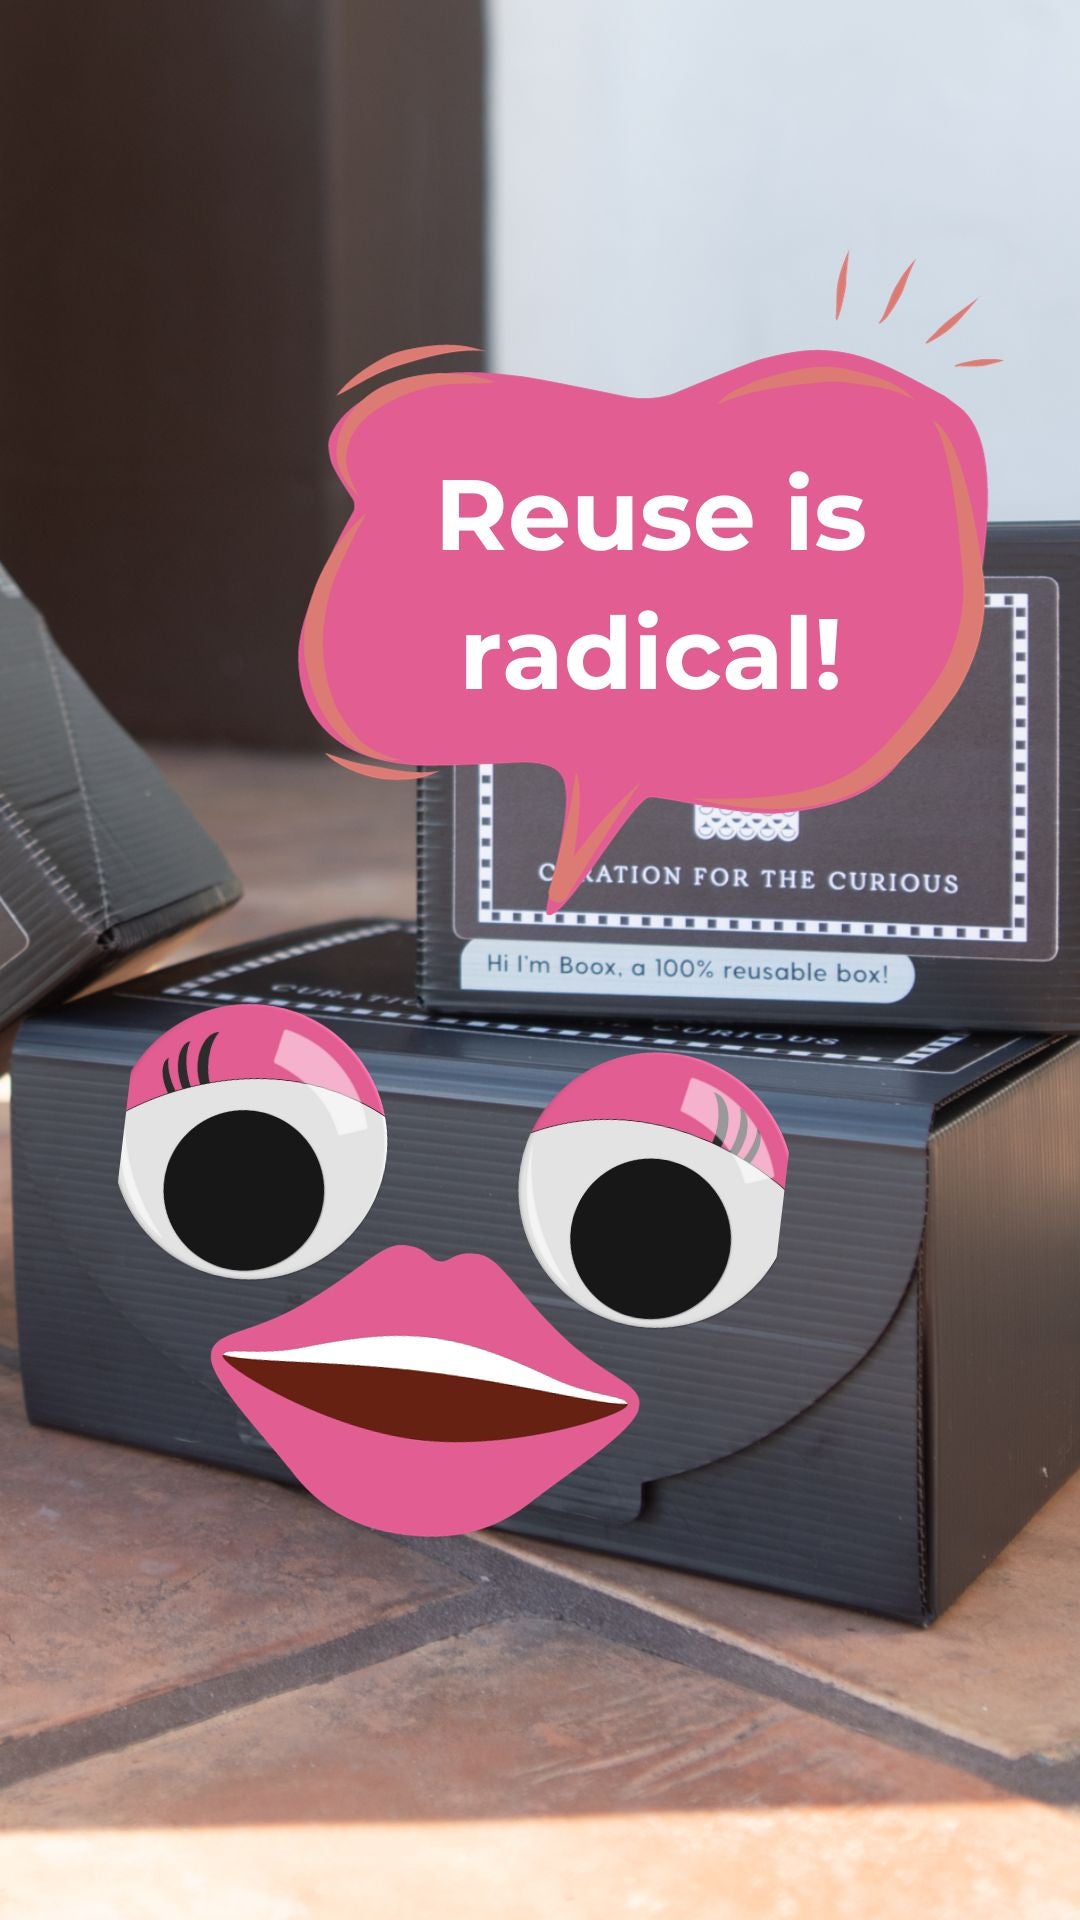 An animated photograph of the Boox boxes with a word bubble that says "Reuse is radical!" 